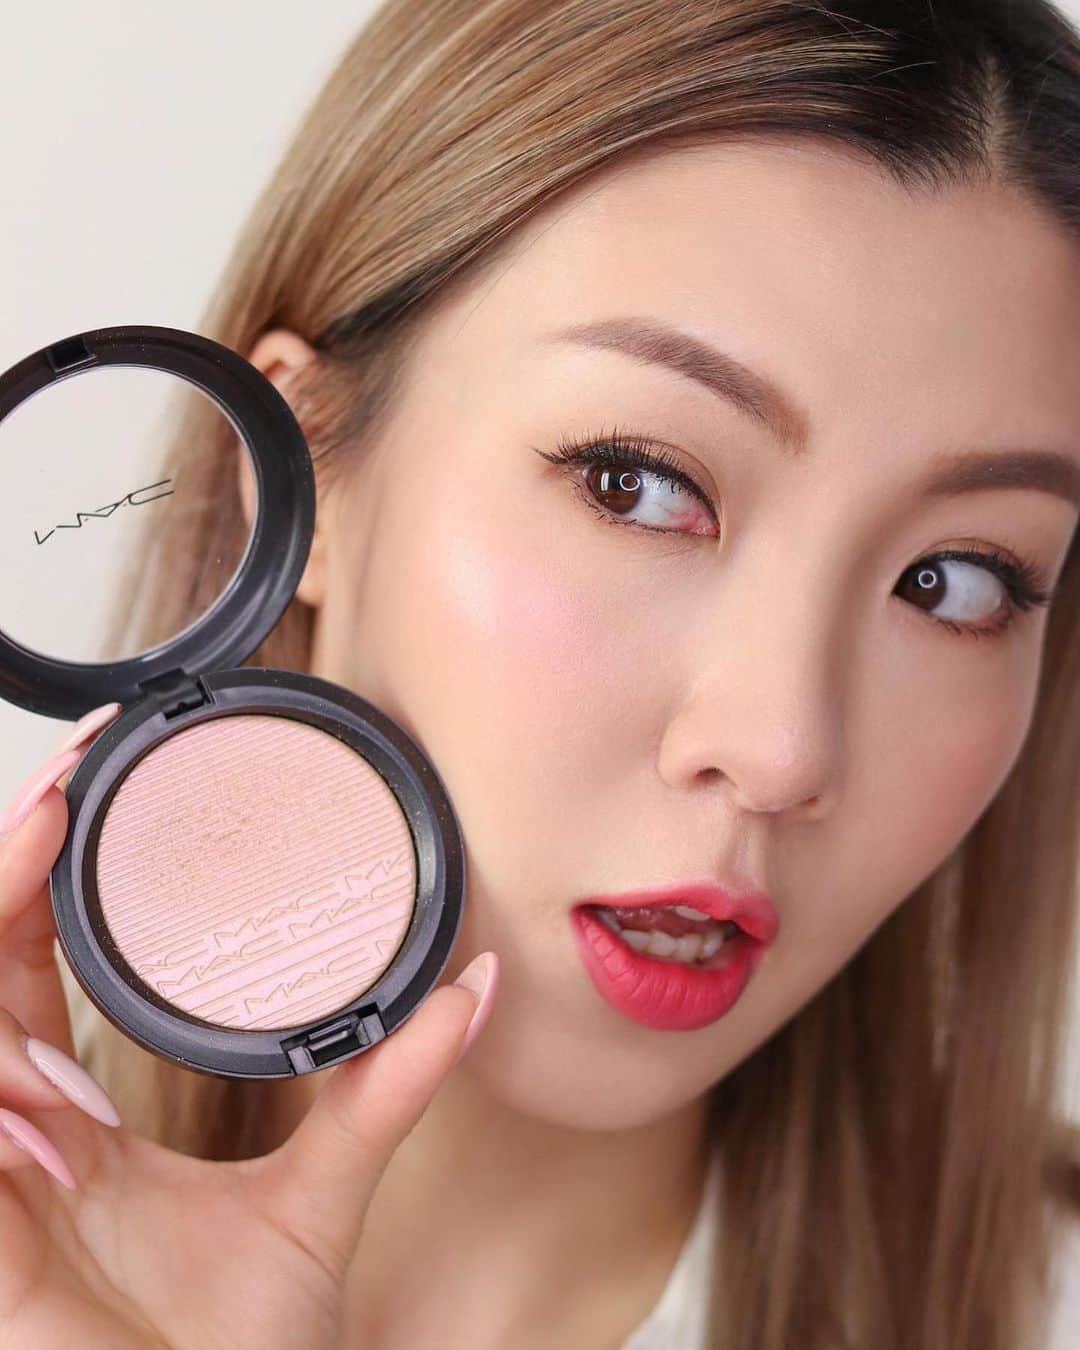 M·A·C Cosmetics Hong Kongさんのインスタグラム写真 - (M·A·C Cosmetics Hong KongInstagram)「《光透亮美妝天書 - 初春綻放仙女粉光》 人間芭比最愛嘅超立體光影粉餅 #ShowGold 色系，淺金同時帶一點粉紅光澤，最襯春櫻季節🌸 以C字手法，由眼側輕刷至蘋果肌，面部輪廓瞬間飽滿，皮膚質感加晒分！ 一刷綻放櫻花女神光澤，一舉一動都亮麗動人✨  由即日起到28/2，到M·A·C 香港門市選購任何3件產品（必須包括最少一件面部底妝），即可獲得全單7折！立即叫埋愛美閨蜜一齊為化妝袋轉季啦！  Product featured: Extra Dimension Skinfinish 超立體光影粉餅 in Show Gold - HK$320 #戀愛光底妝 #MACHongKong  Regram from @Hiddie  [The High-Shine Makeup Guide: The Glow Factor in Spring!] Get the cherry-blossom-fresh look with Lisa's favourite Extra Dimension Skinfinish in Show Gold! Perfect for Sakura seasons, thanks to its pink undertone with a subtle hint of gold 🌸 Apply the higlighter in a "C" shape, starting from your brows down to your cheekbones, to layer on a romantic luminosity and achieve a fresh, radiant look ✨  From today till Feb 28, enjoy 30% off upon purchasing 3 or more products (must include at least 1 face product)! Tag your BFFs below to change your vanity makeup goodies together!」2月25日 19時15分 - maccosmeticshk